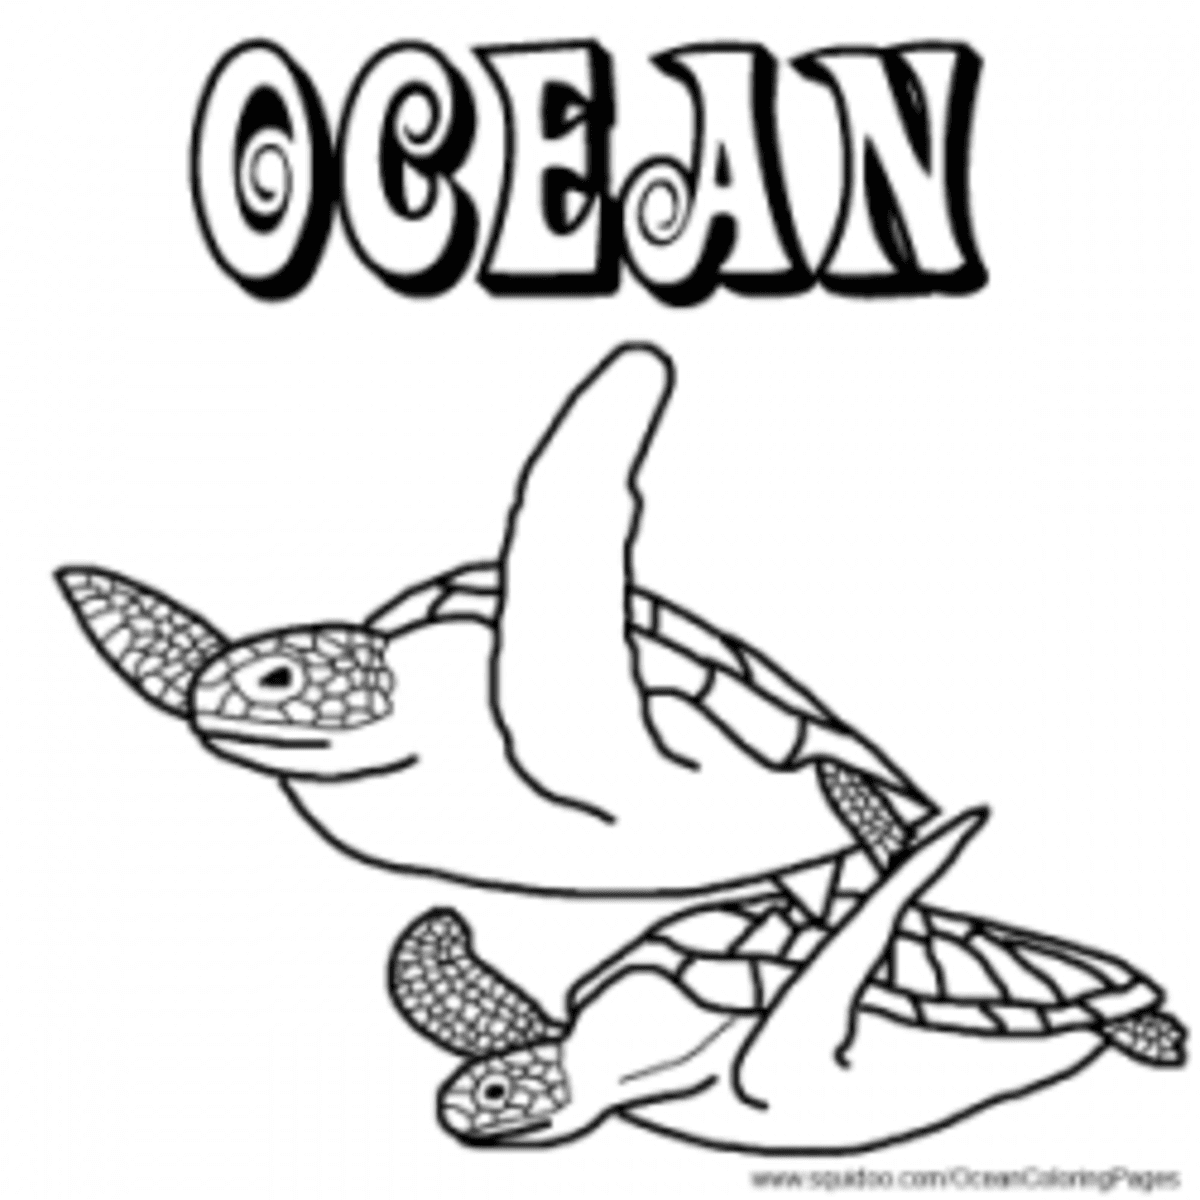 Ocean Animal Facts and Coloring Pages - HubPages